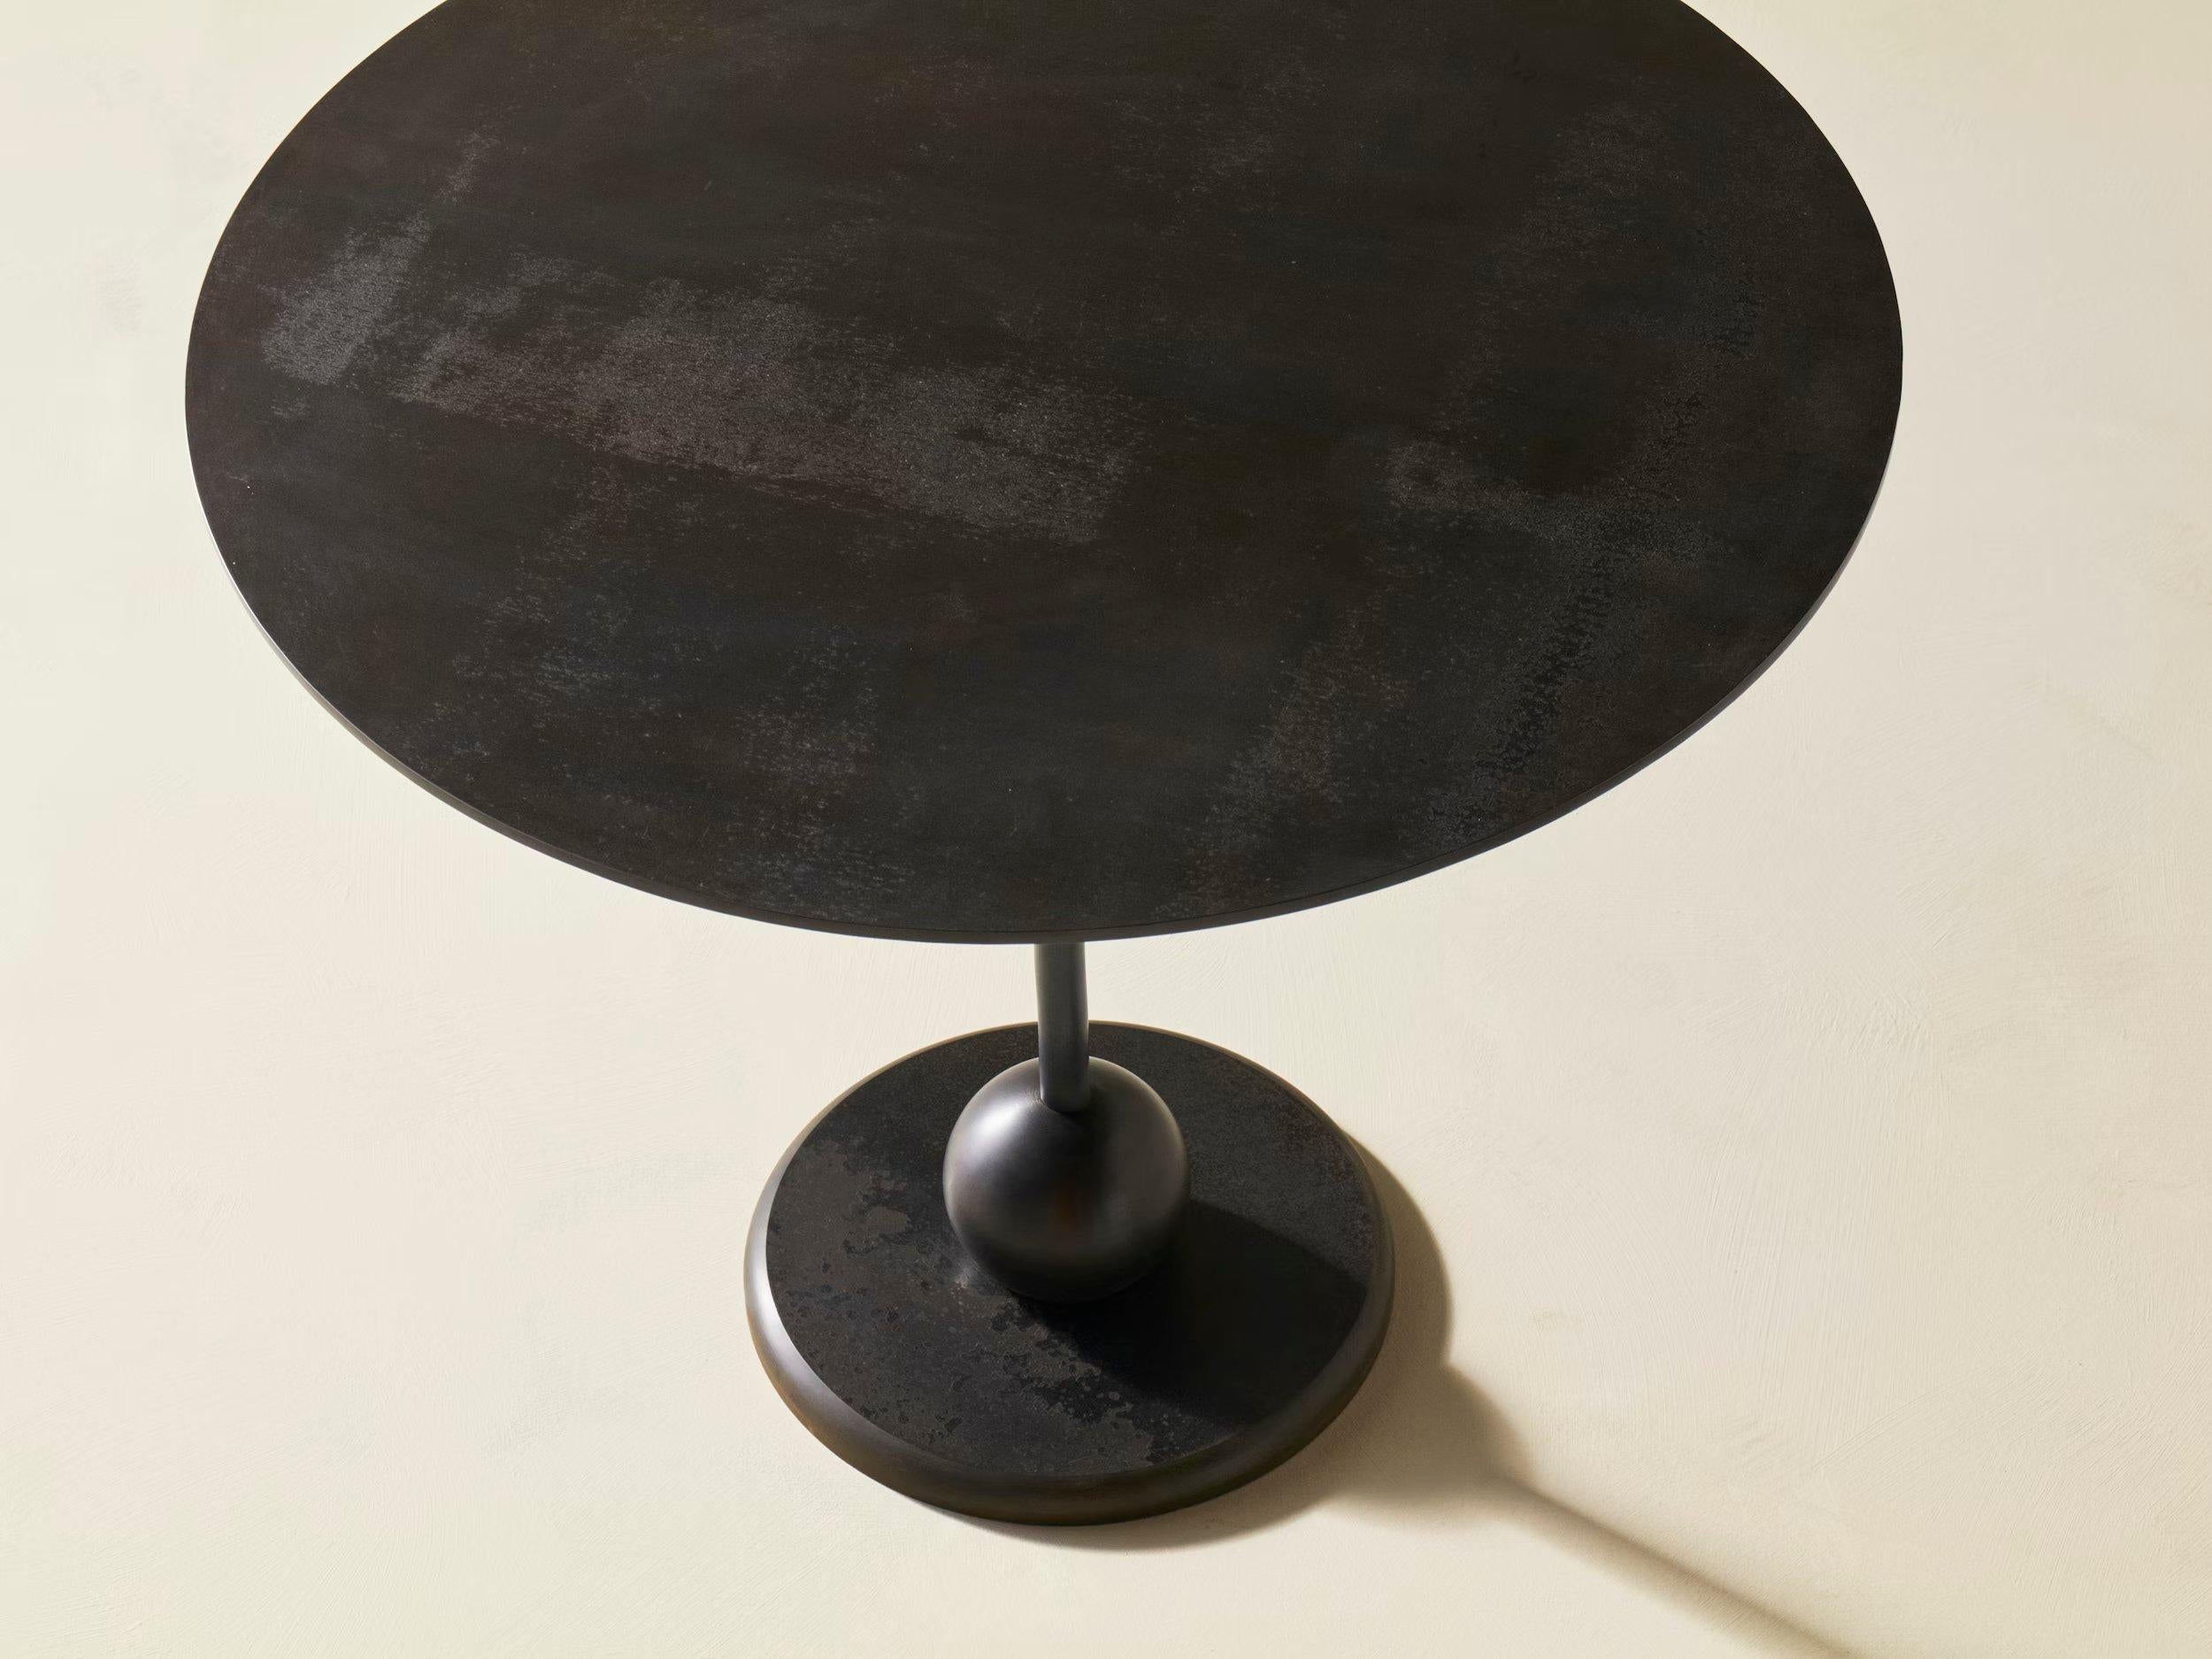 Inspired by eight ball POOL, just like the game, the Eight Café Table is all about well-planned shapes and angles. Its elegant, well-balanced proportions catch the eye and spark the imagination. The base and tabletop are turned from Craft Black